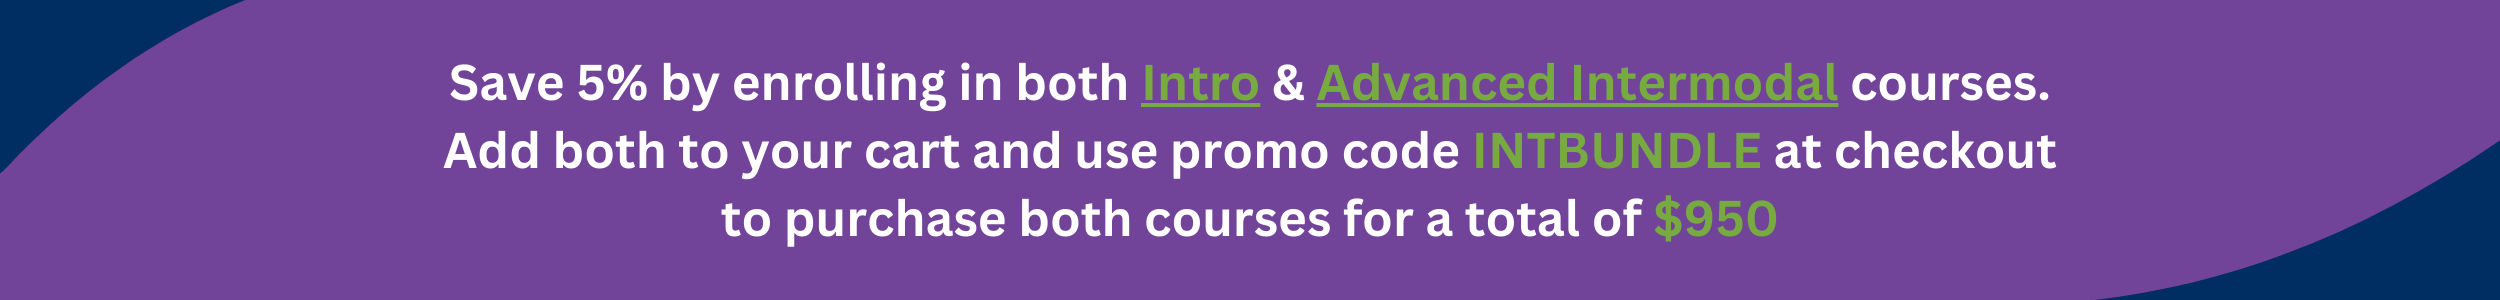 Save 5% by enrolling in both Intro & Advanced Intermodal courses. Add both to your cart and use promo code INTBUNDLE at checkout to purchase both courses for a total of $950